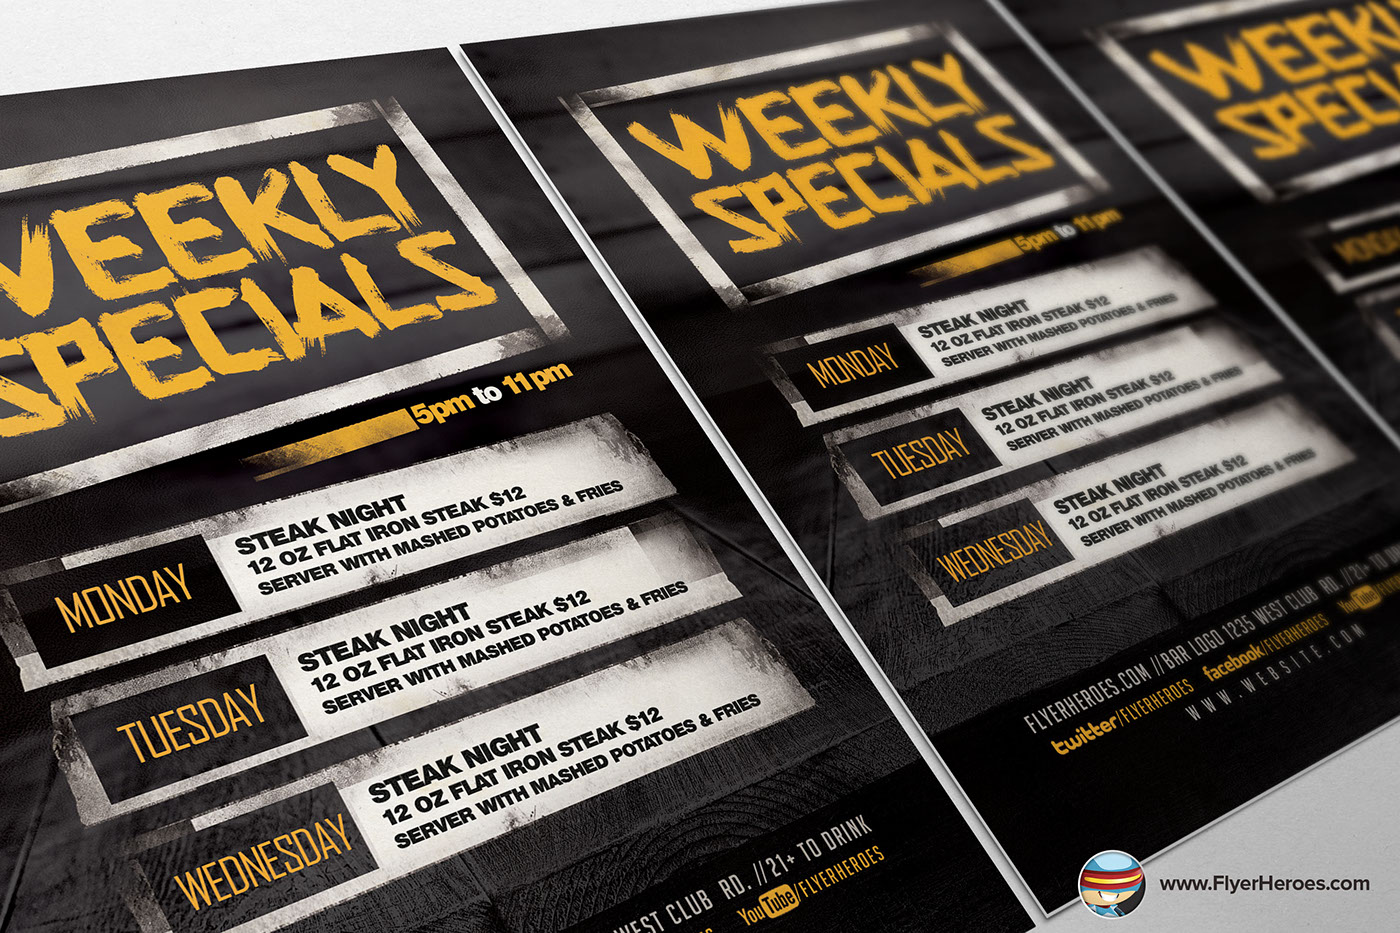 Weekly special flyer template psd adobe photoshop business